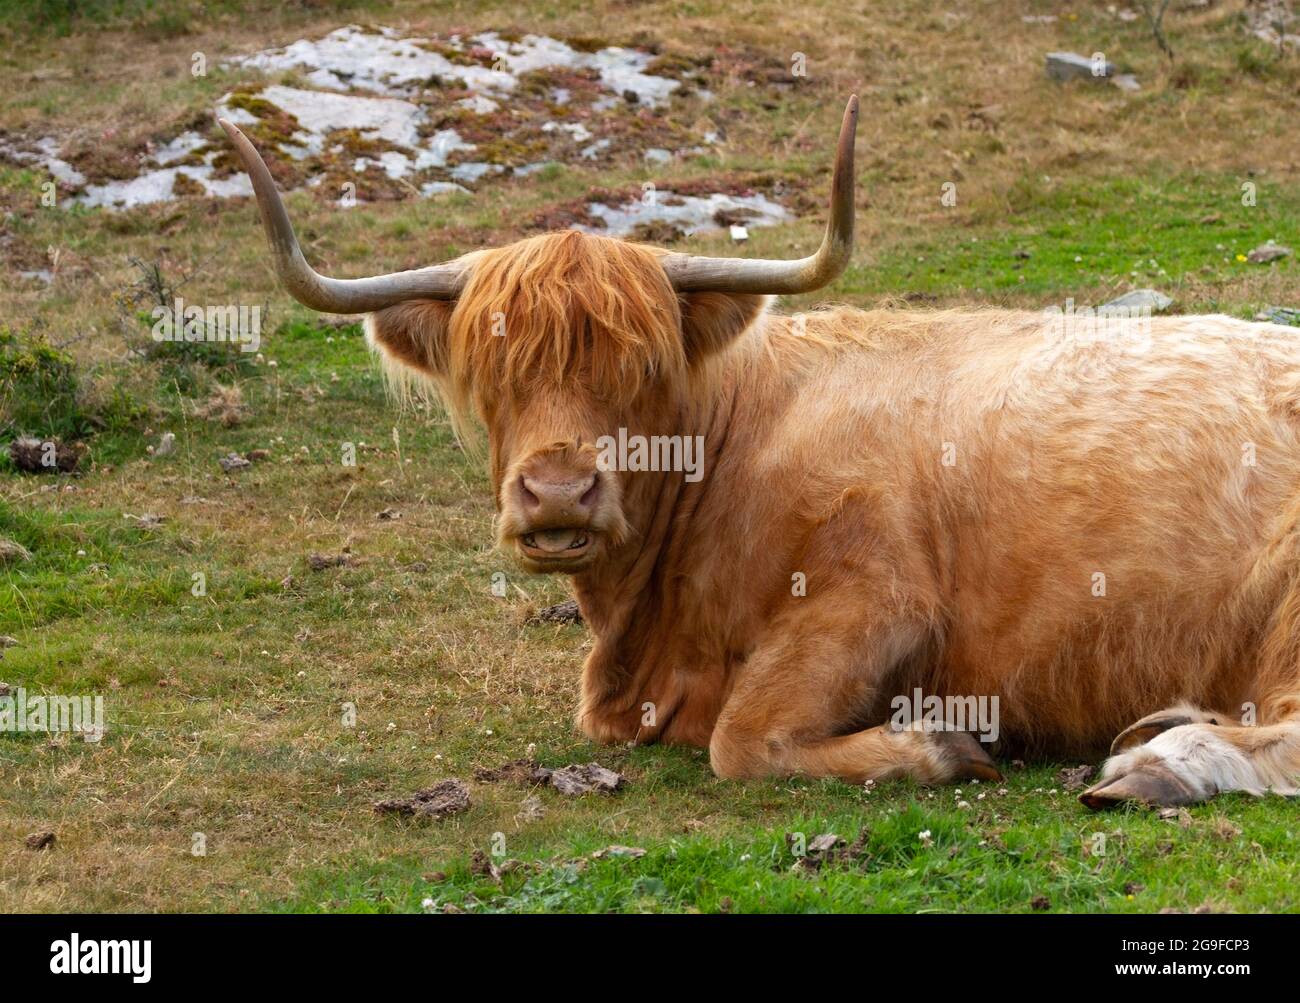 A tradition breed of domestic cattle from Scotland, the Highland cattle was bred for its hardiness and its beef. they descend for the Hamitic Longhorn Stock Photo